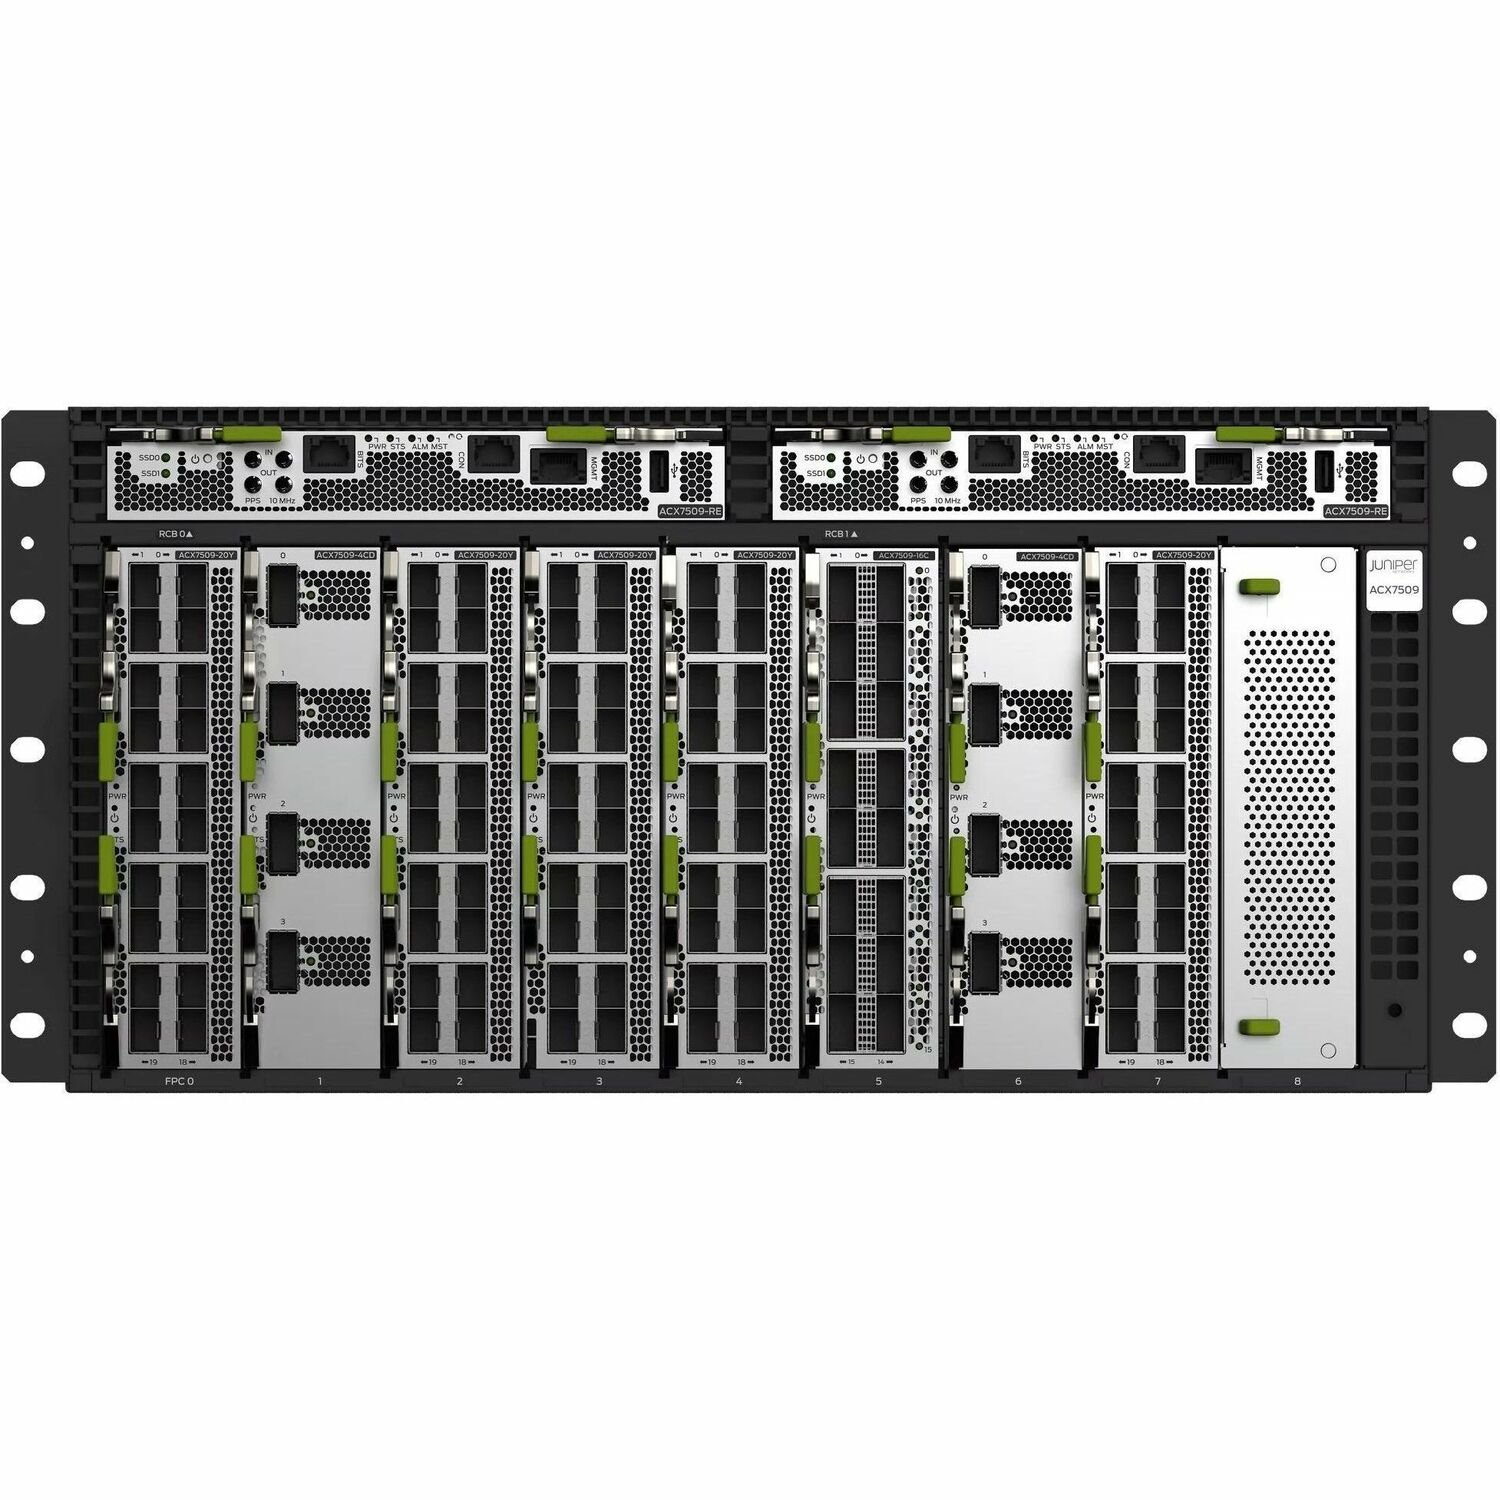 Juniper ACX7509 Router Chassis